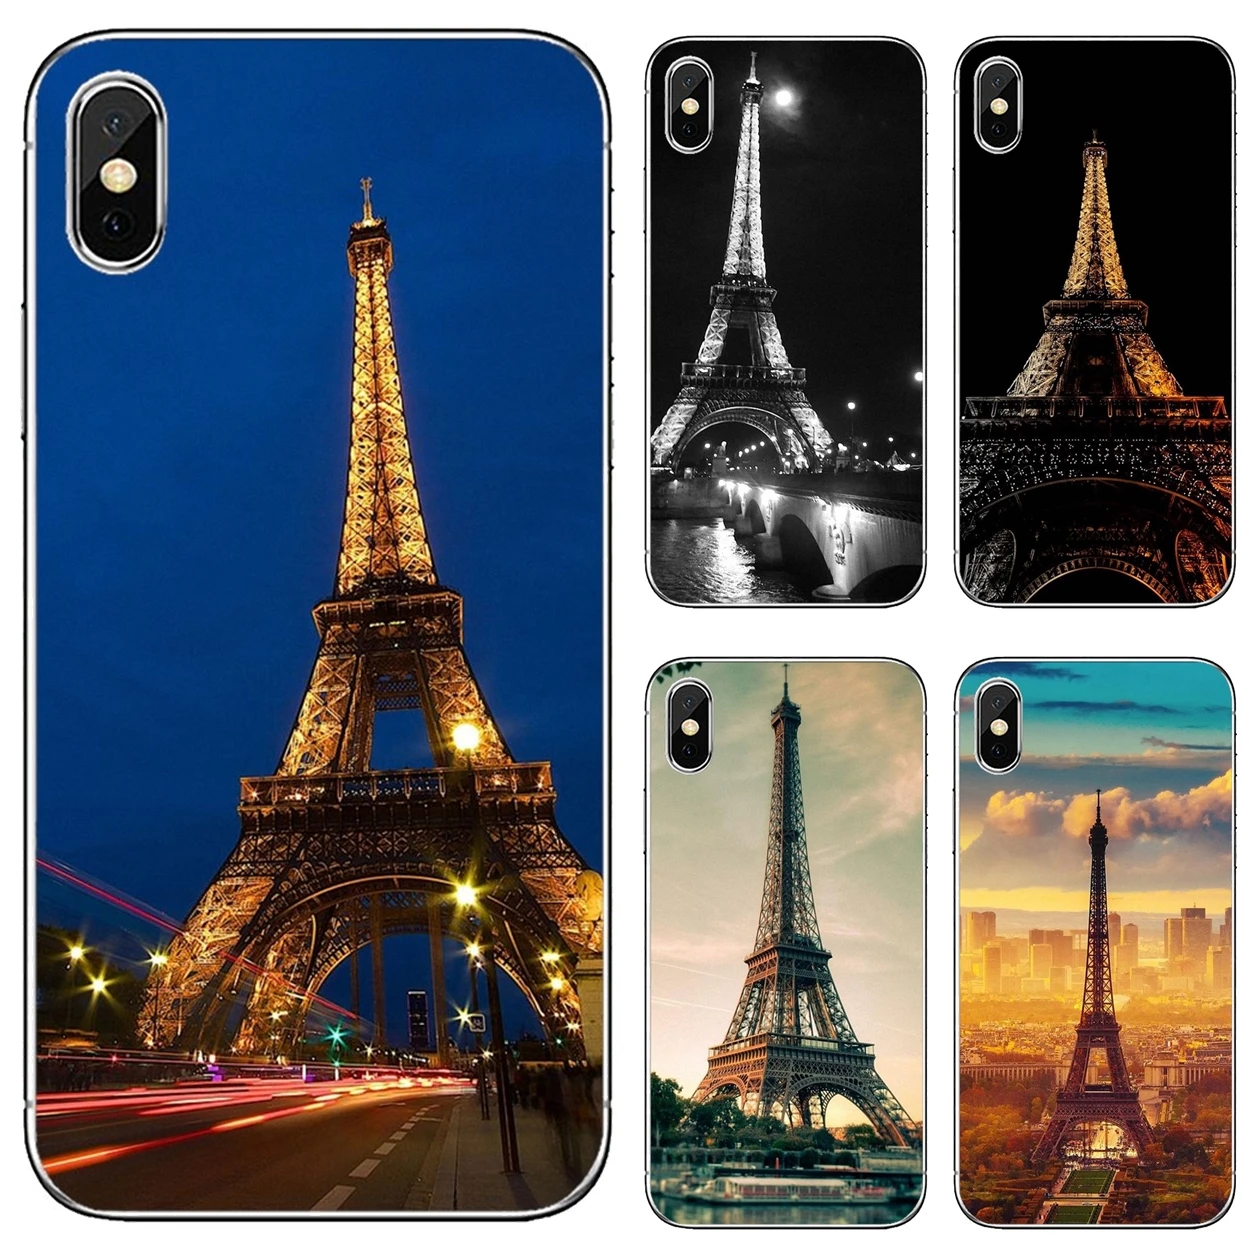 

Eiffel-Tower-Night-Bokeh-Lights For iPod Touch iPhone 10 11 12 Pro 4S 5S SE 5C 6 6S 7 8 X XR XS Plus Max 2020 Soft Cases